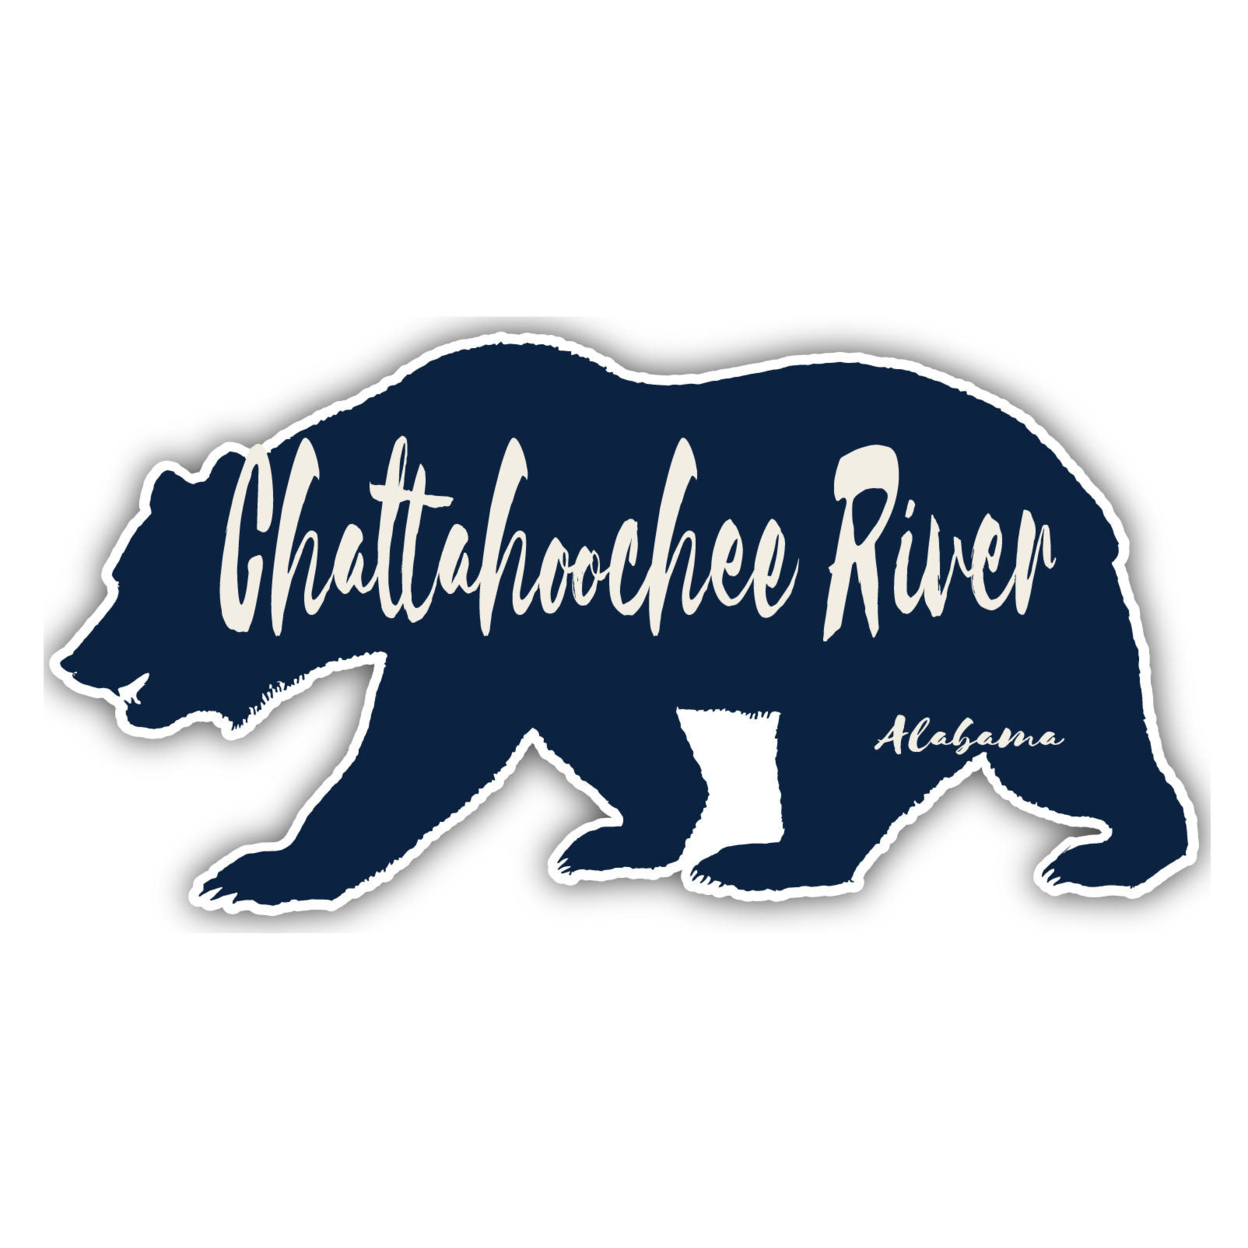 Chattahoochee River Alabama Souvenir Decorative Stickers (Choose Theme And Size) - 4-Pack, 10-Inch, Bear